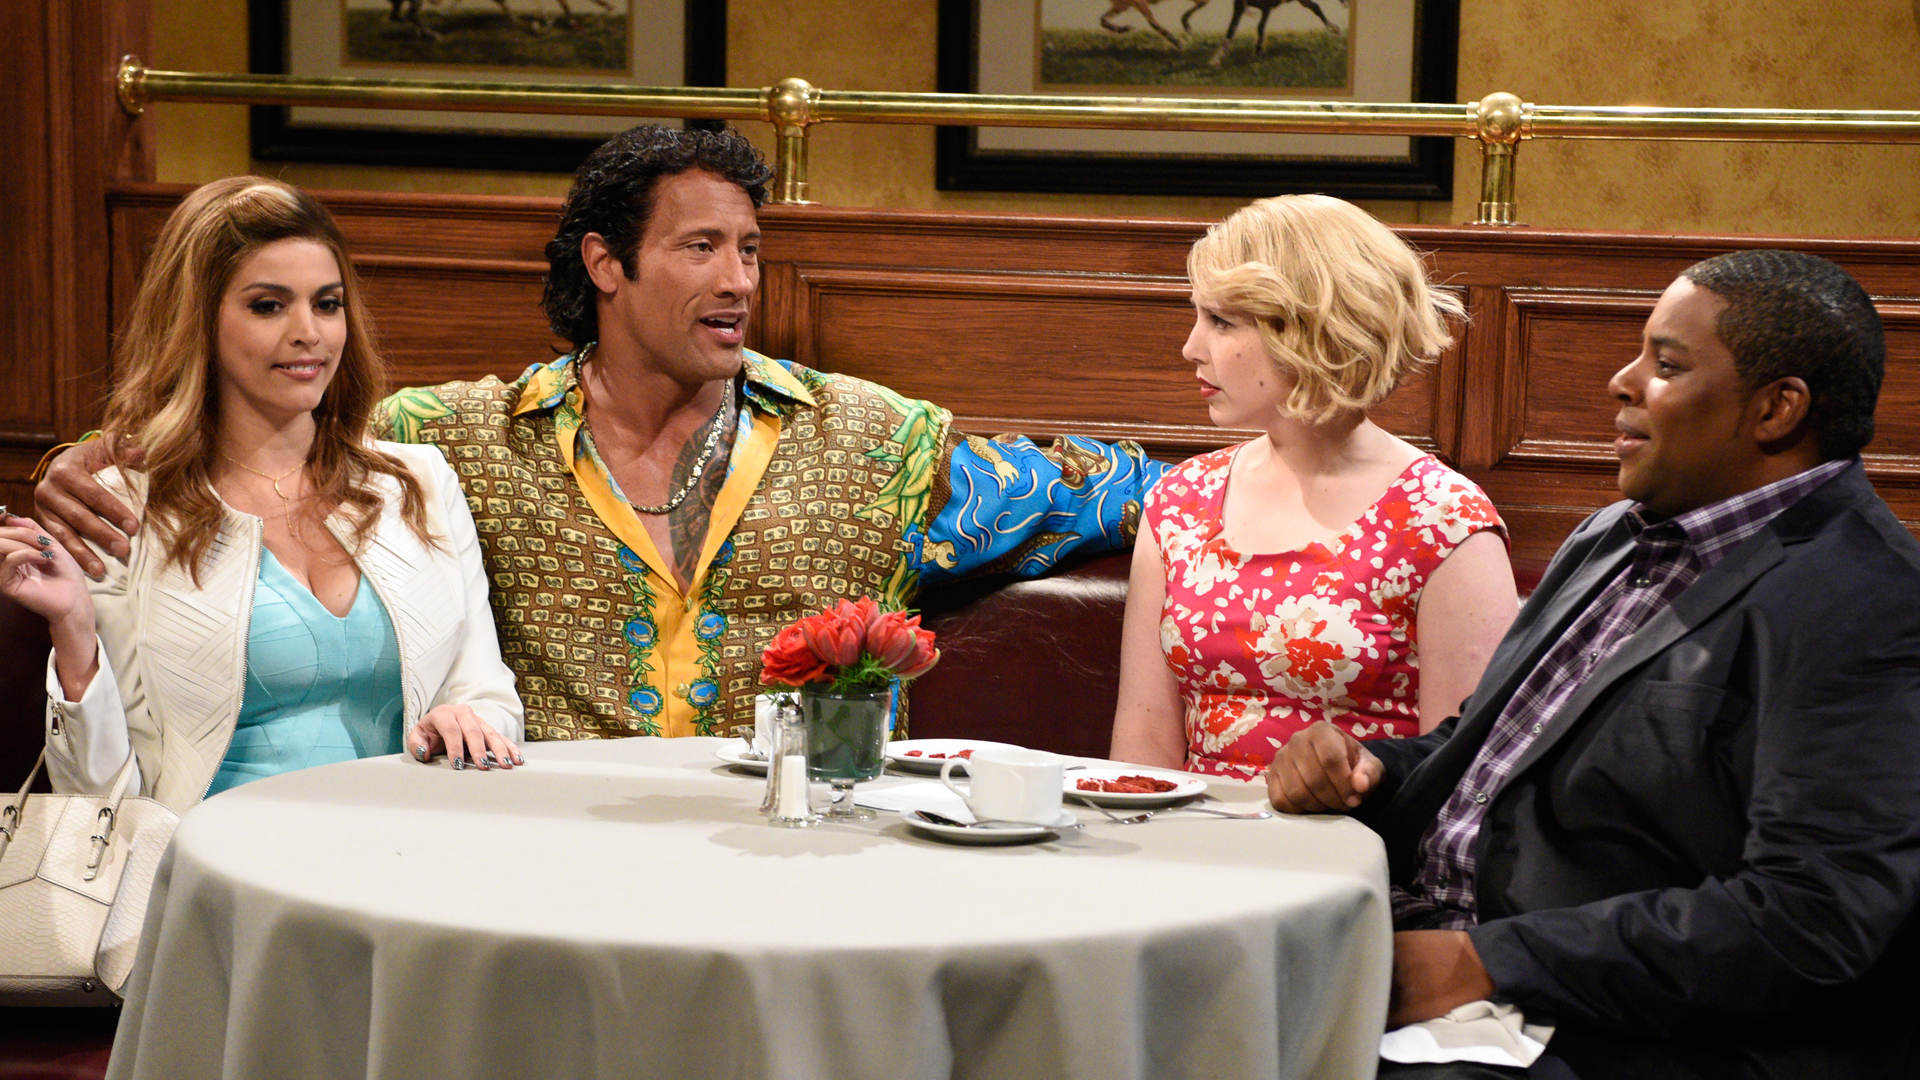 Watch Dinner Date From Saturday Night Live